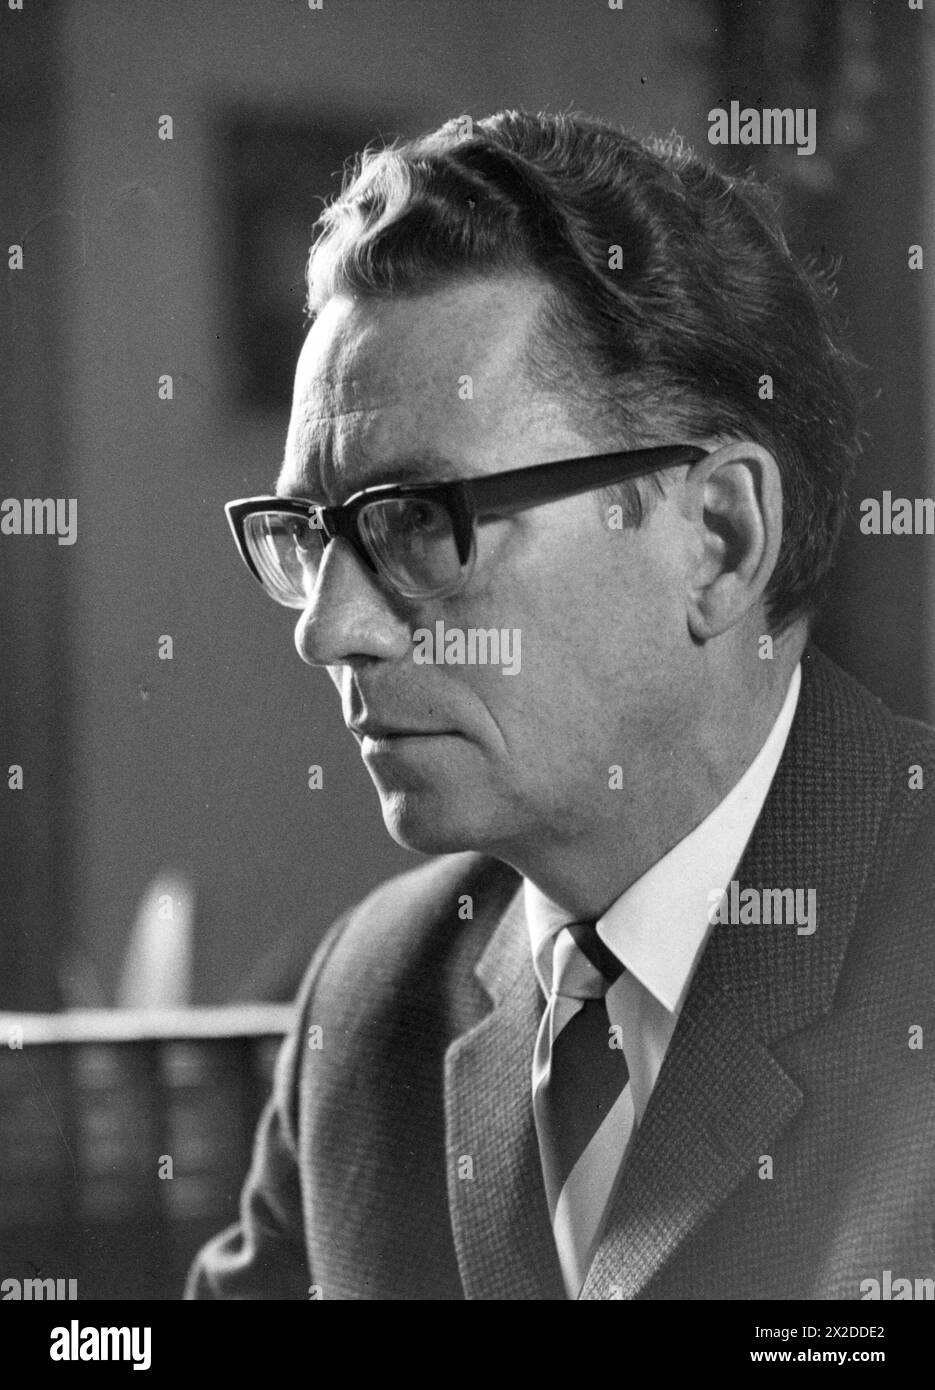 STEIN, WERNER, 14.12.1913 - 31.3,1993, ADDITIONAL-RIGHTS-LEARANCE-INFO-NOT-AVAILABLE Banque D'Images